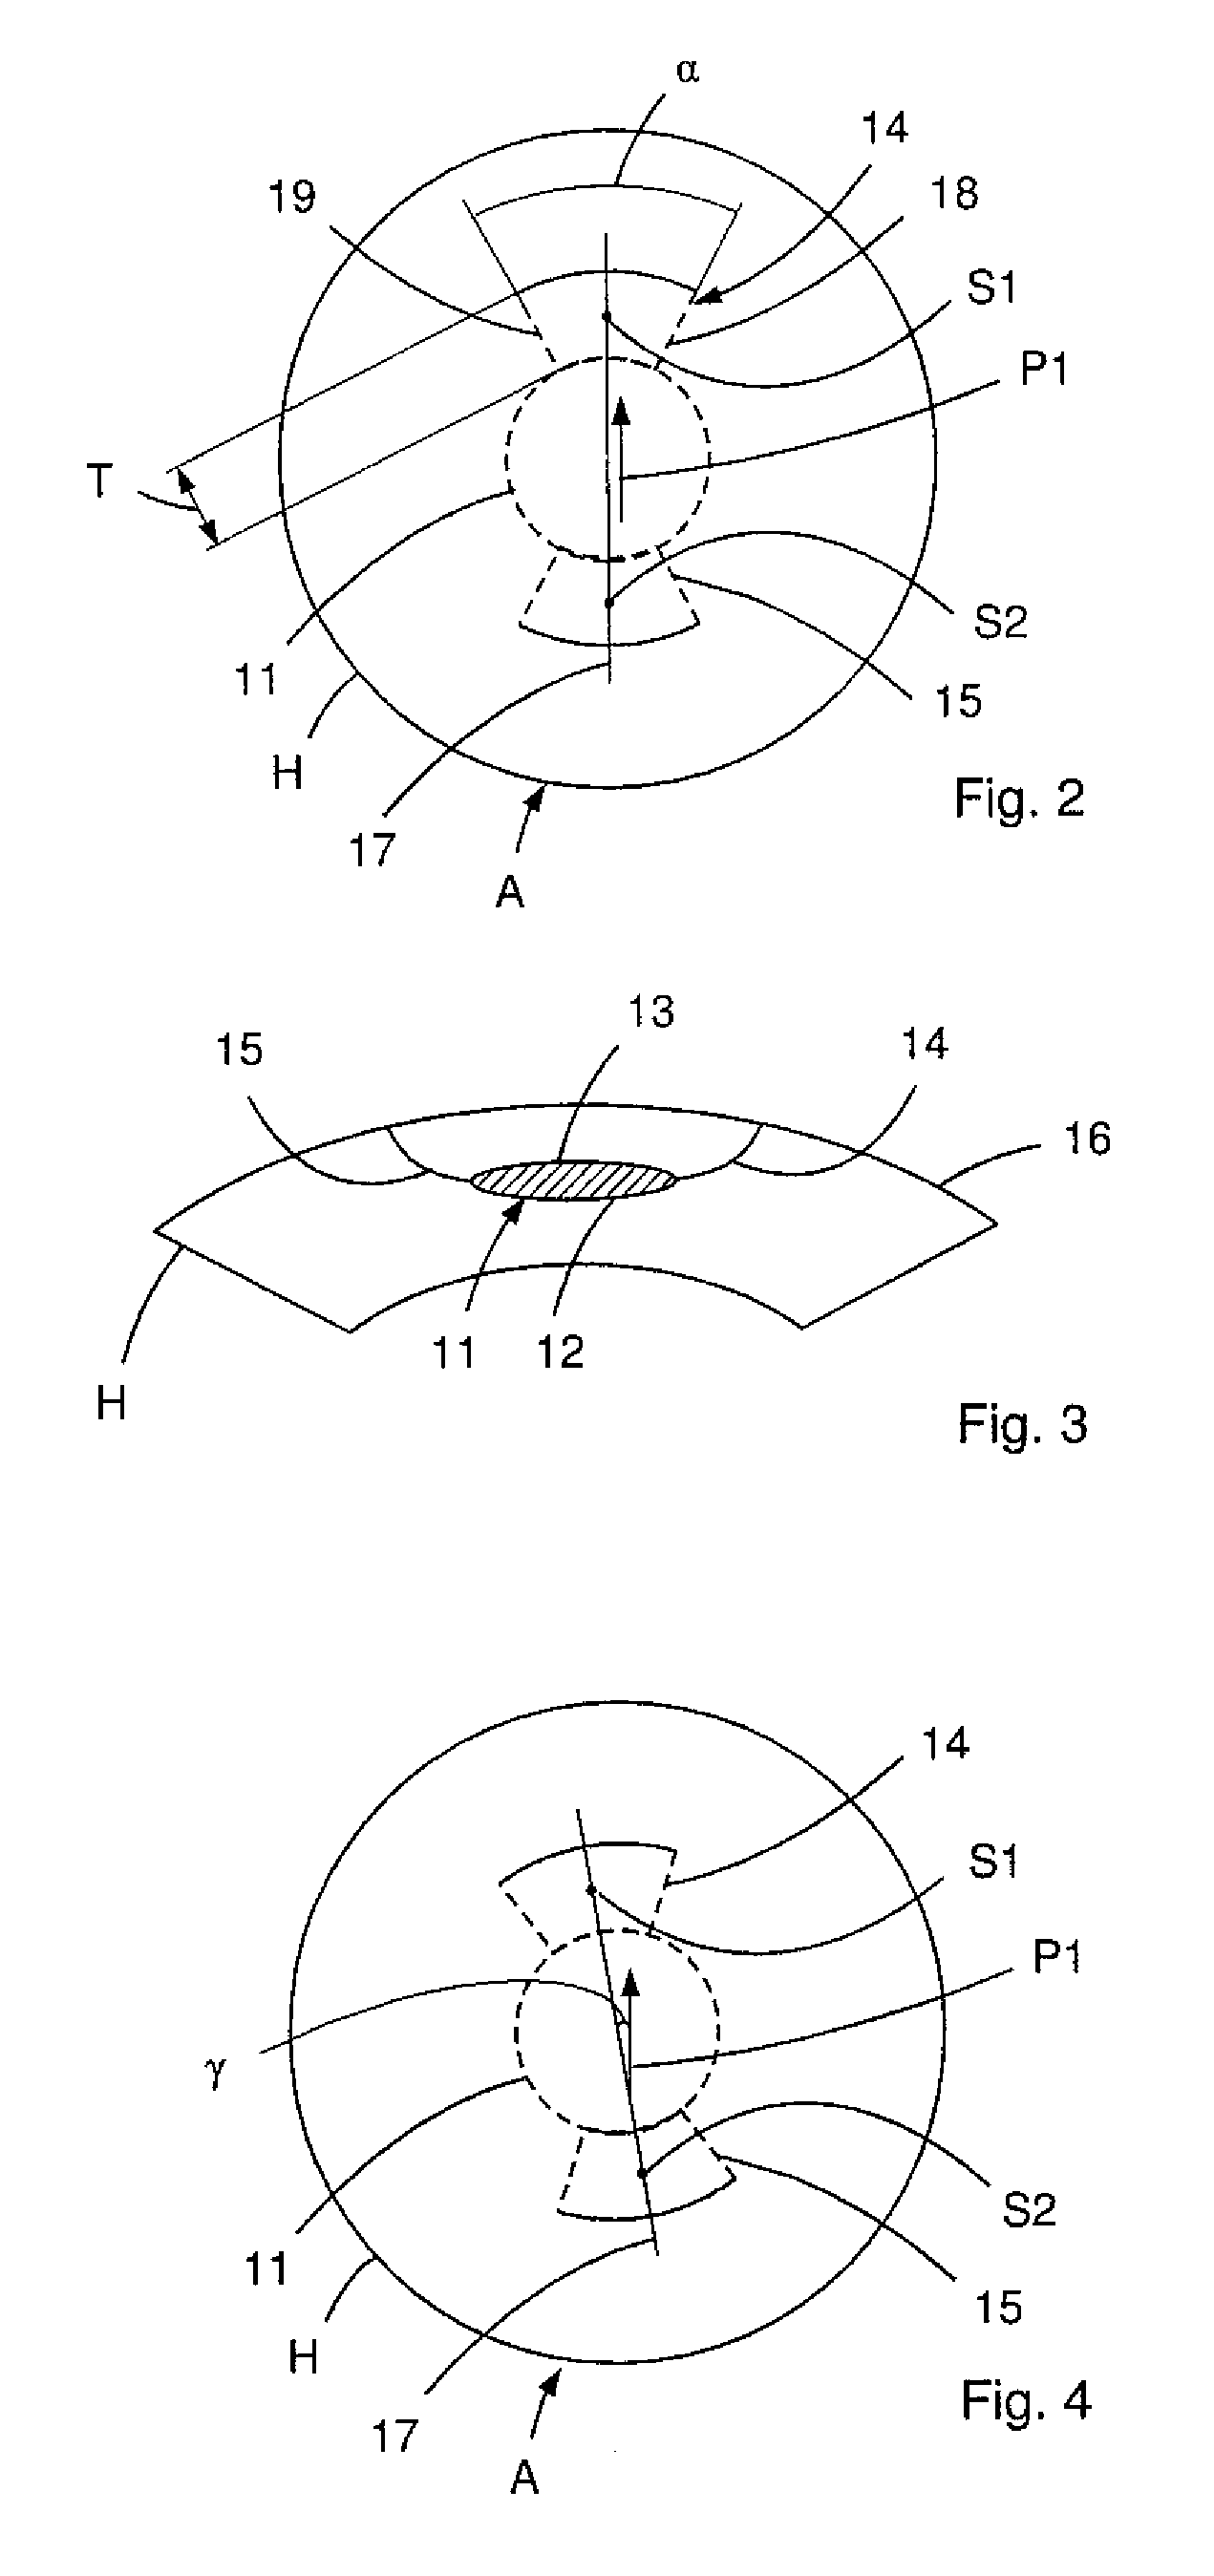 Apparatus and method for generating cut surfaces in the cornea of an eye for correction of ametropia